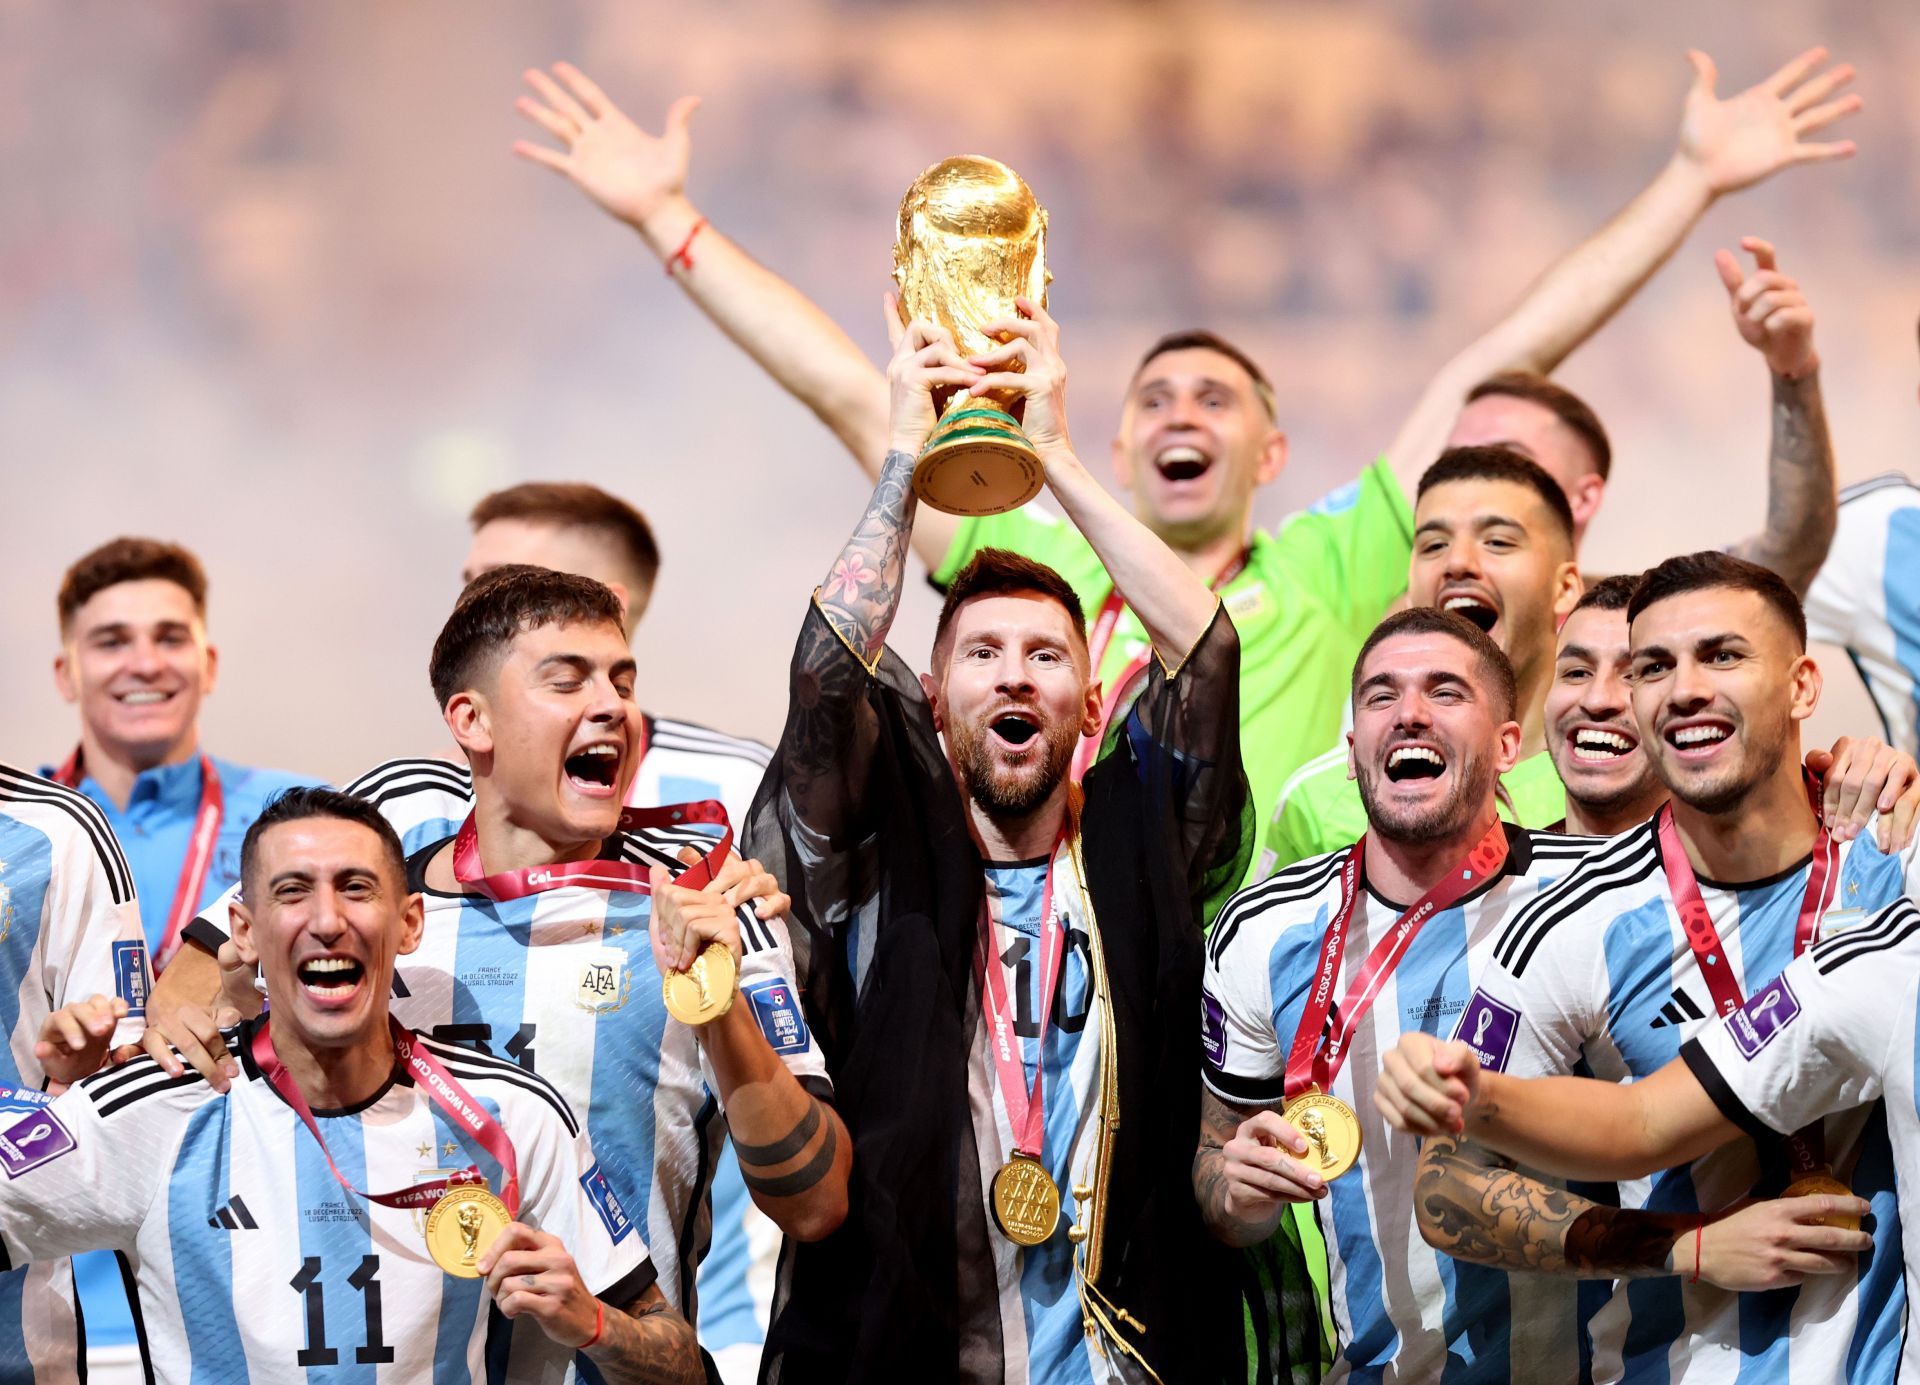 Lionel Messi played an important role in helping Argentina to the 2022 FIFA World Cup win.